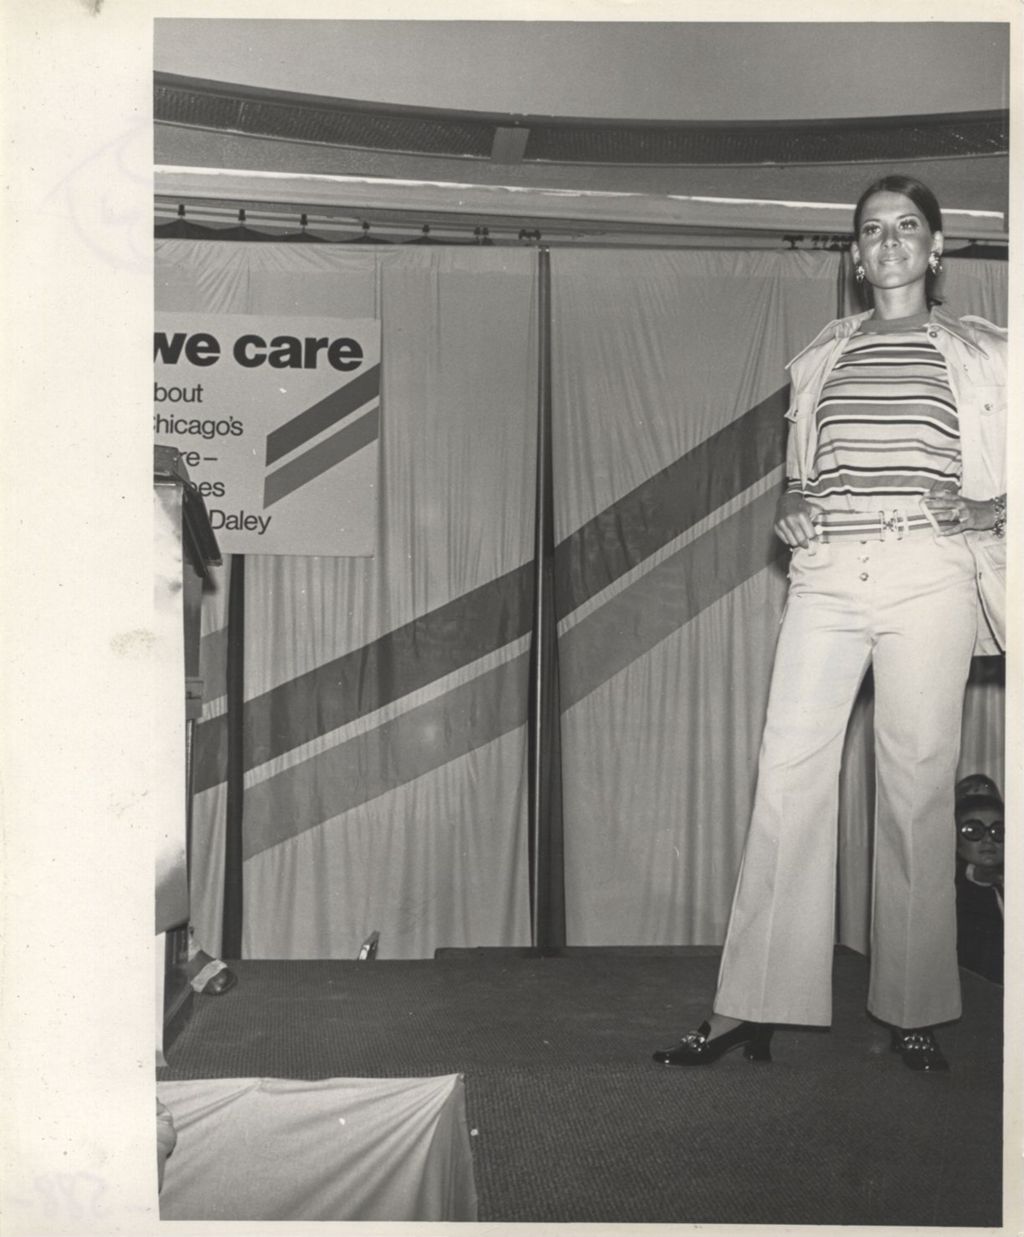 Woman modeling an outfit at a "We Care" event